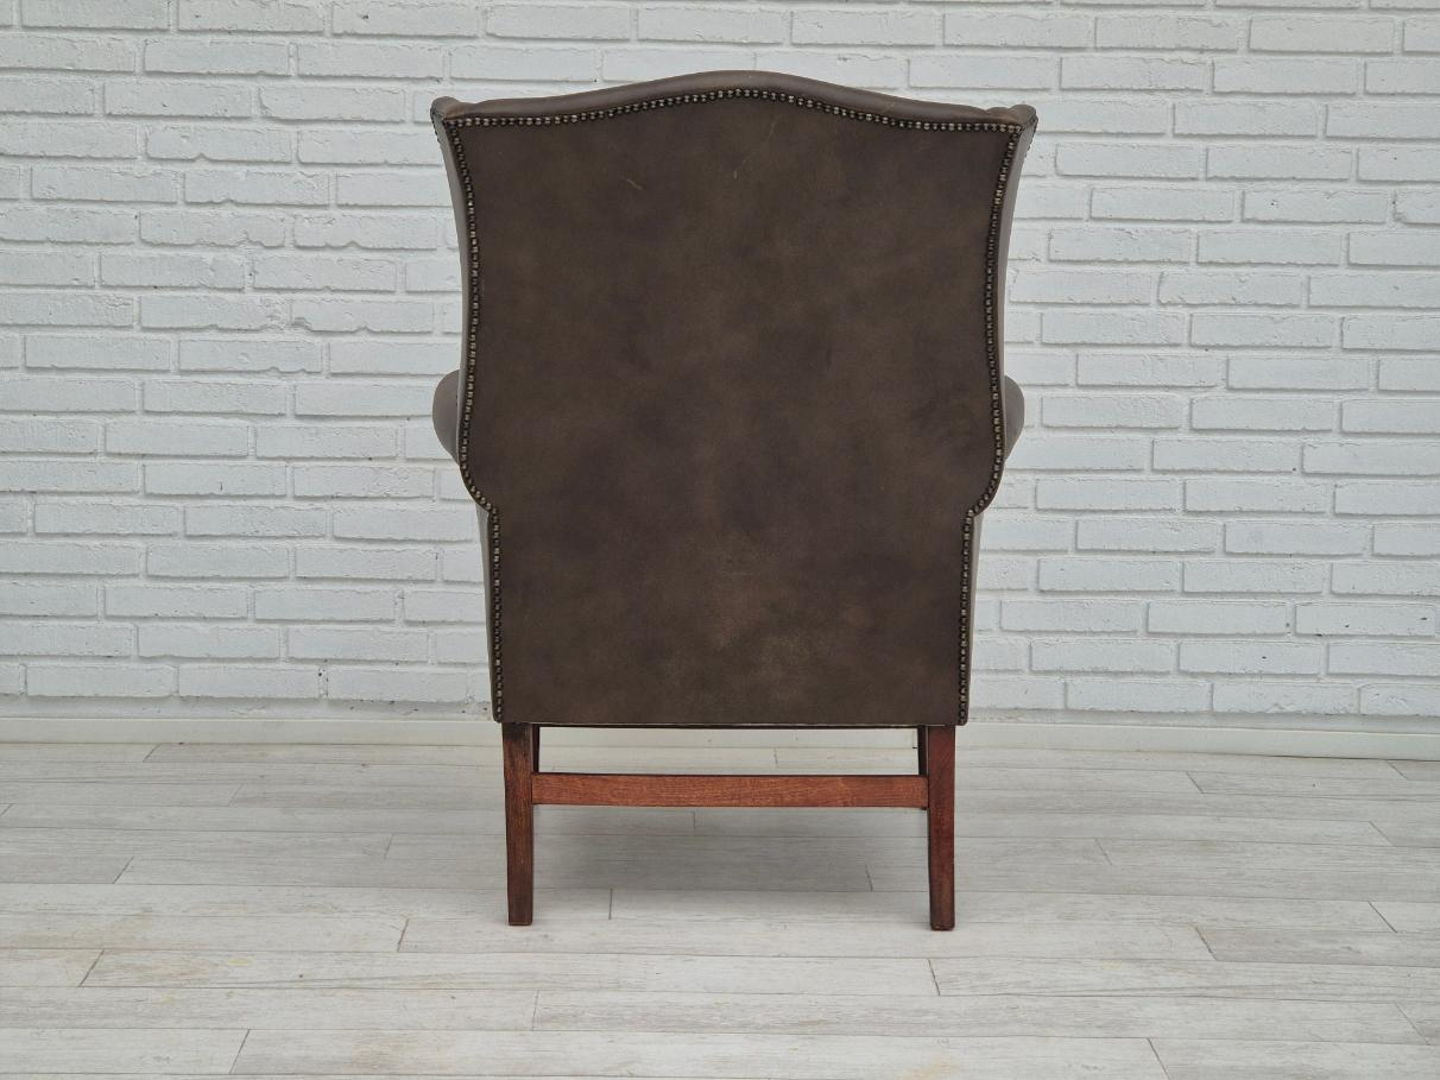 1970s, Vintage wingback armchair, original condition, leather, beech wood.